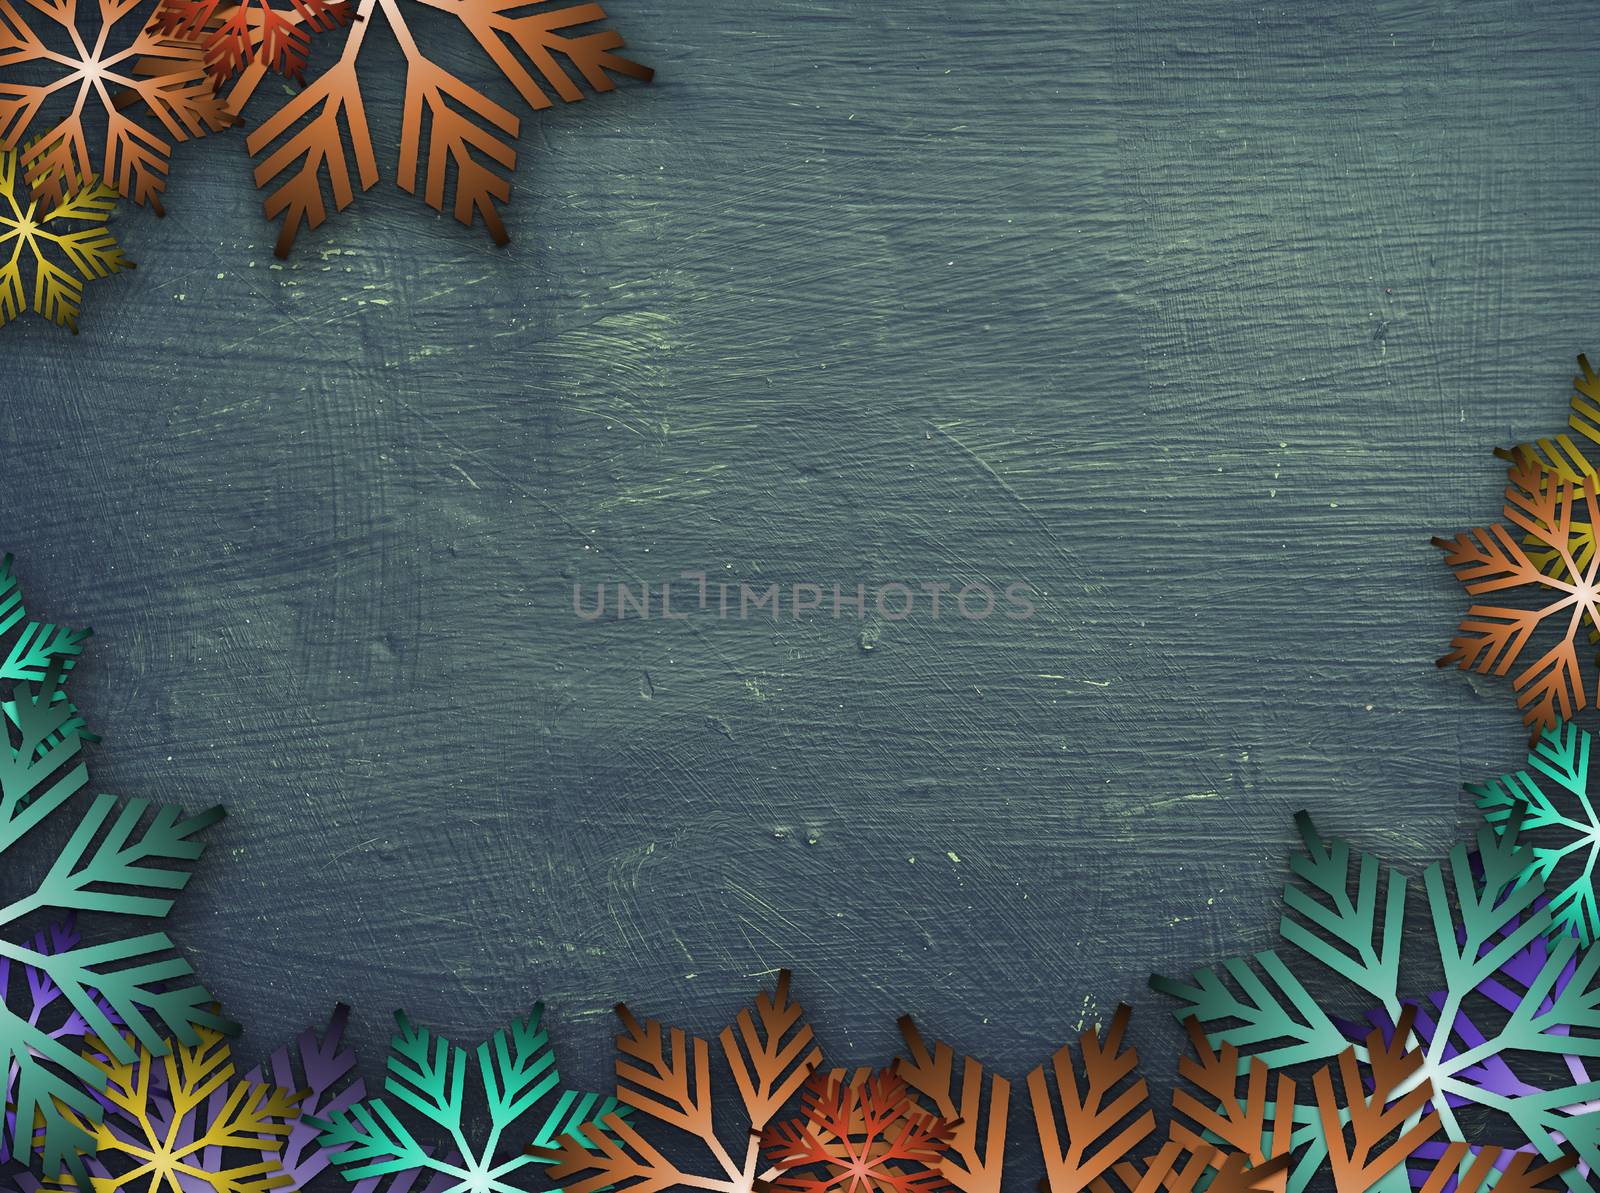 Christmas flakes for background in colors by osvaldo_medina